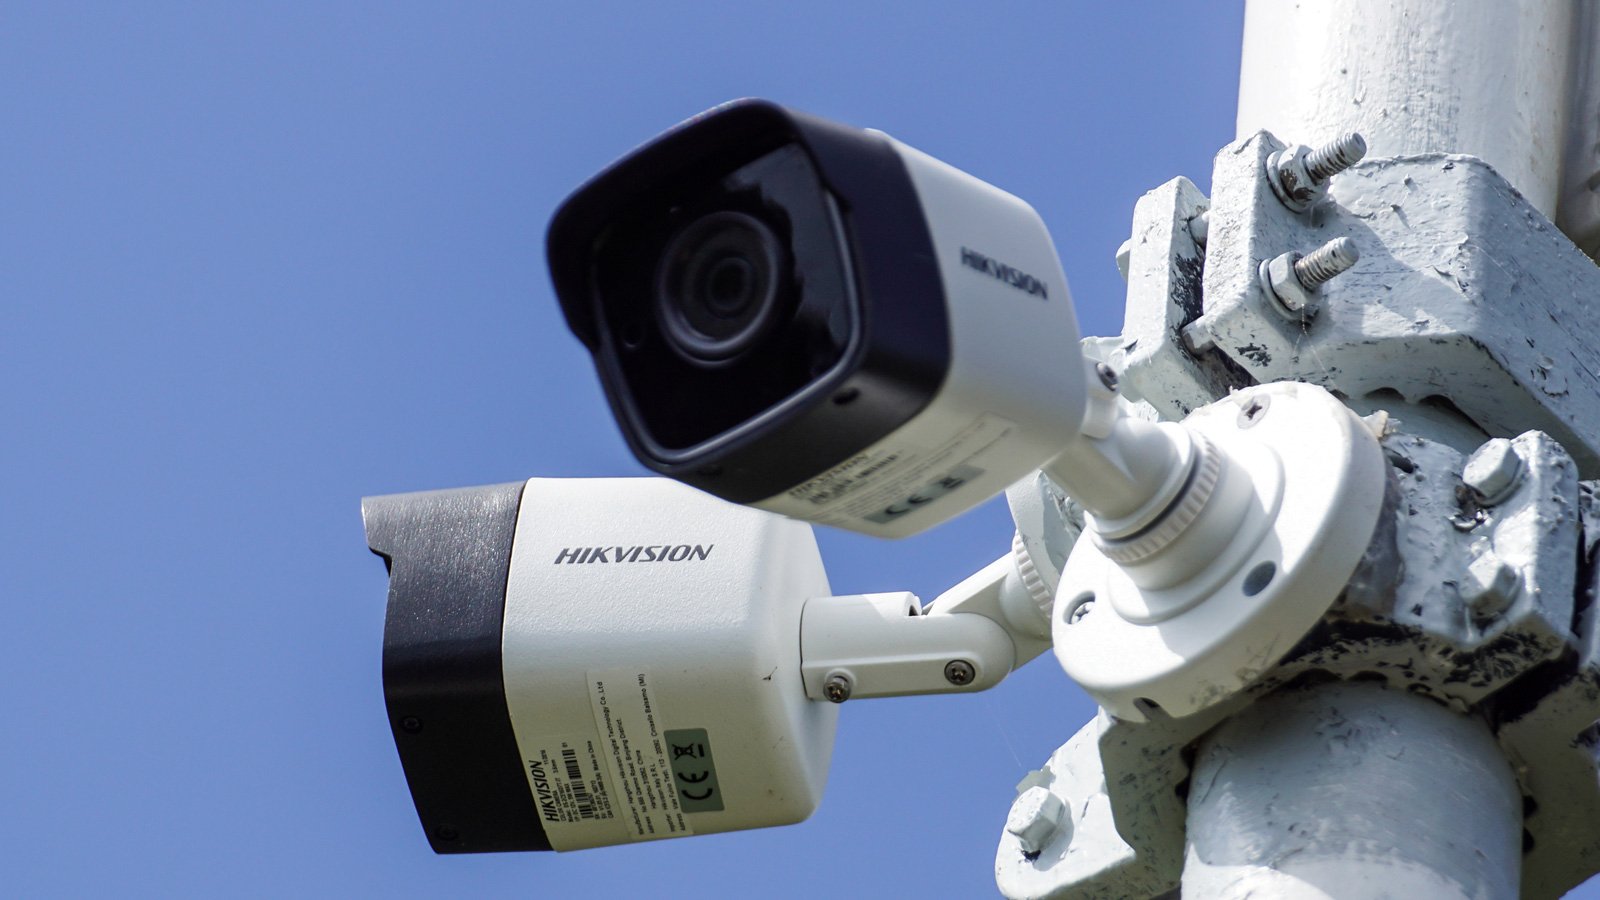 over-80,000-exploitable-hikvision-cameras-exposed-online